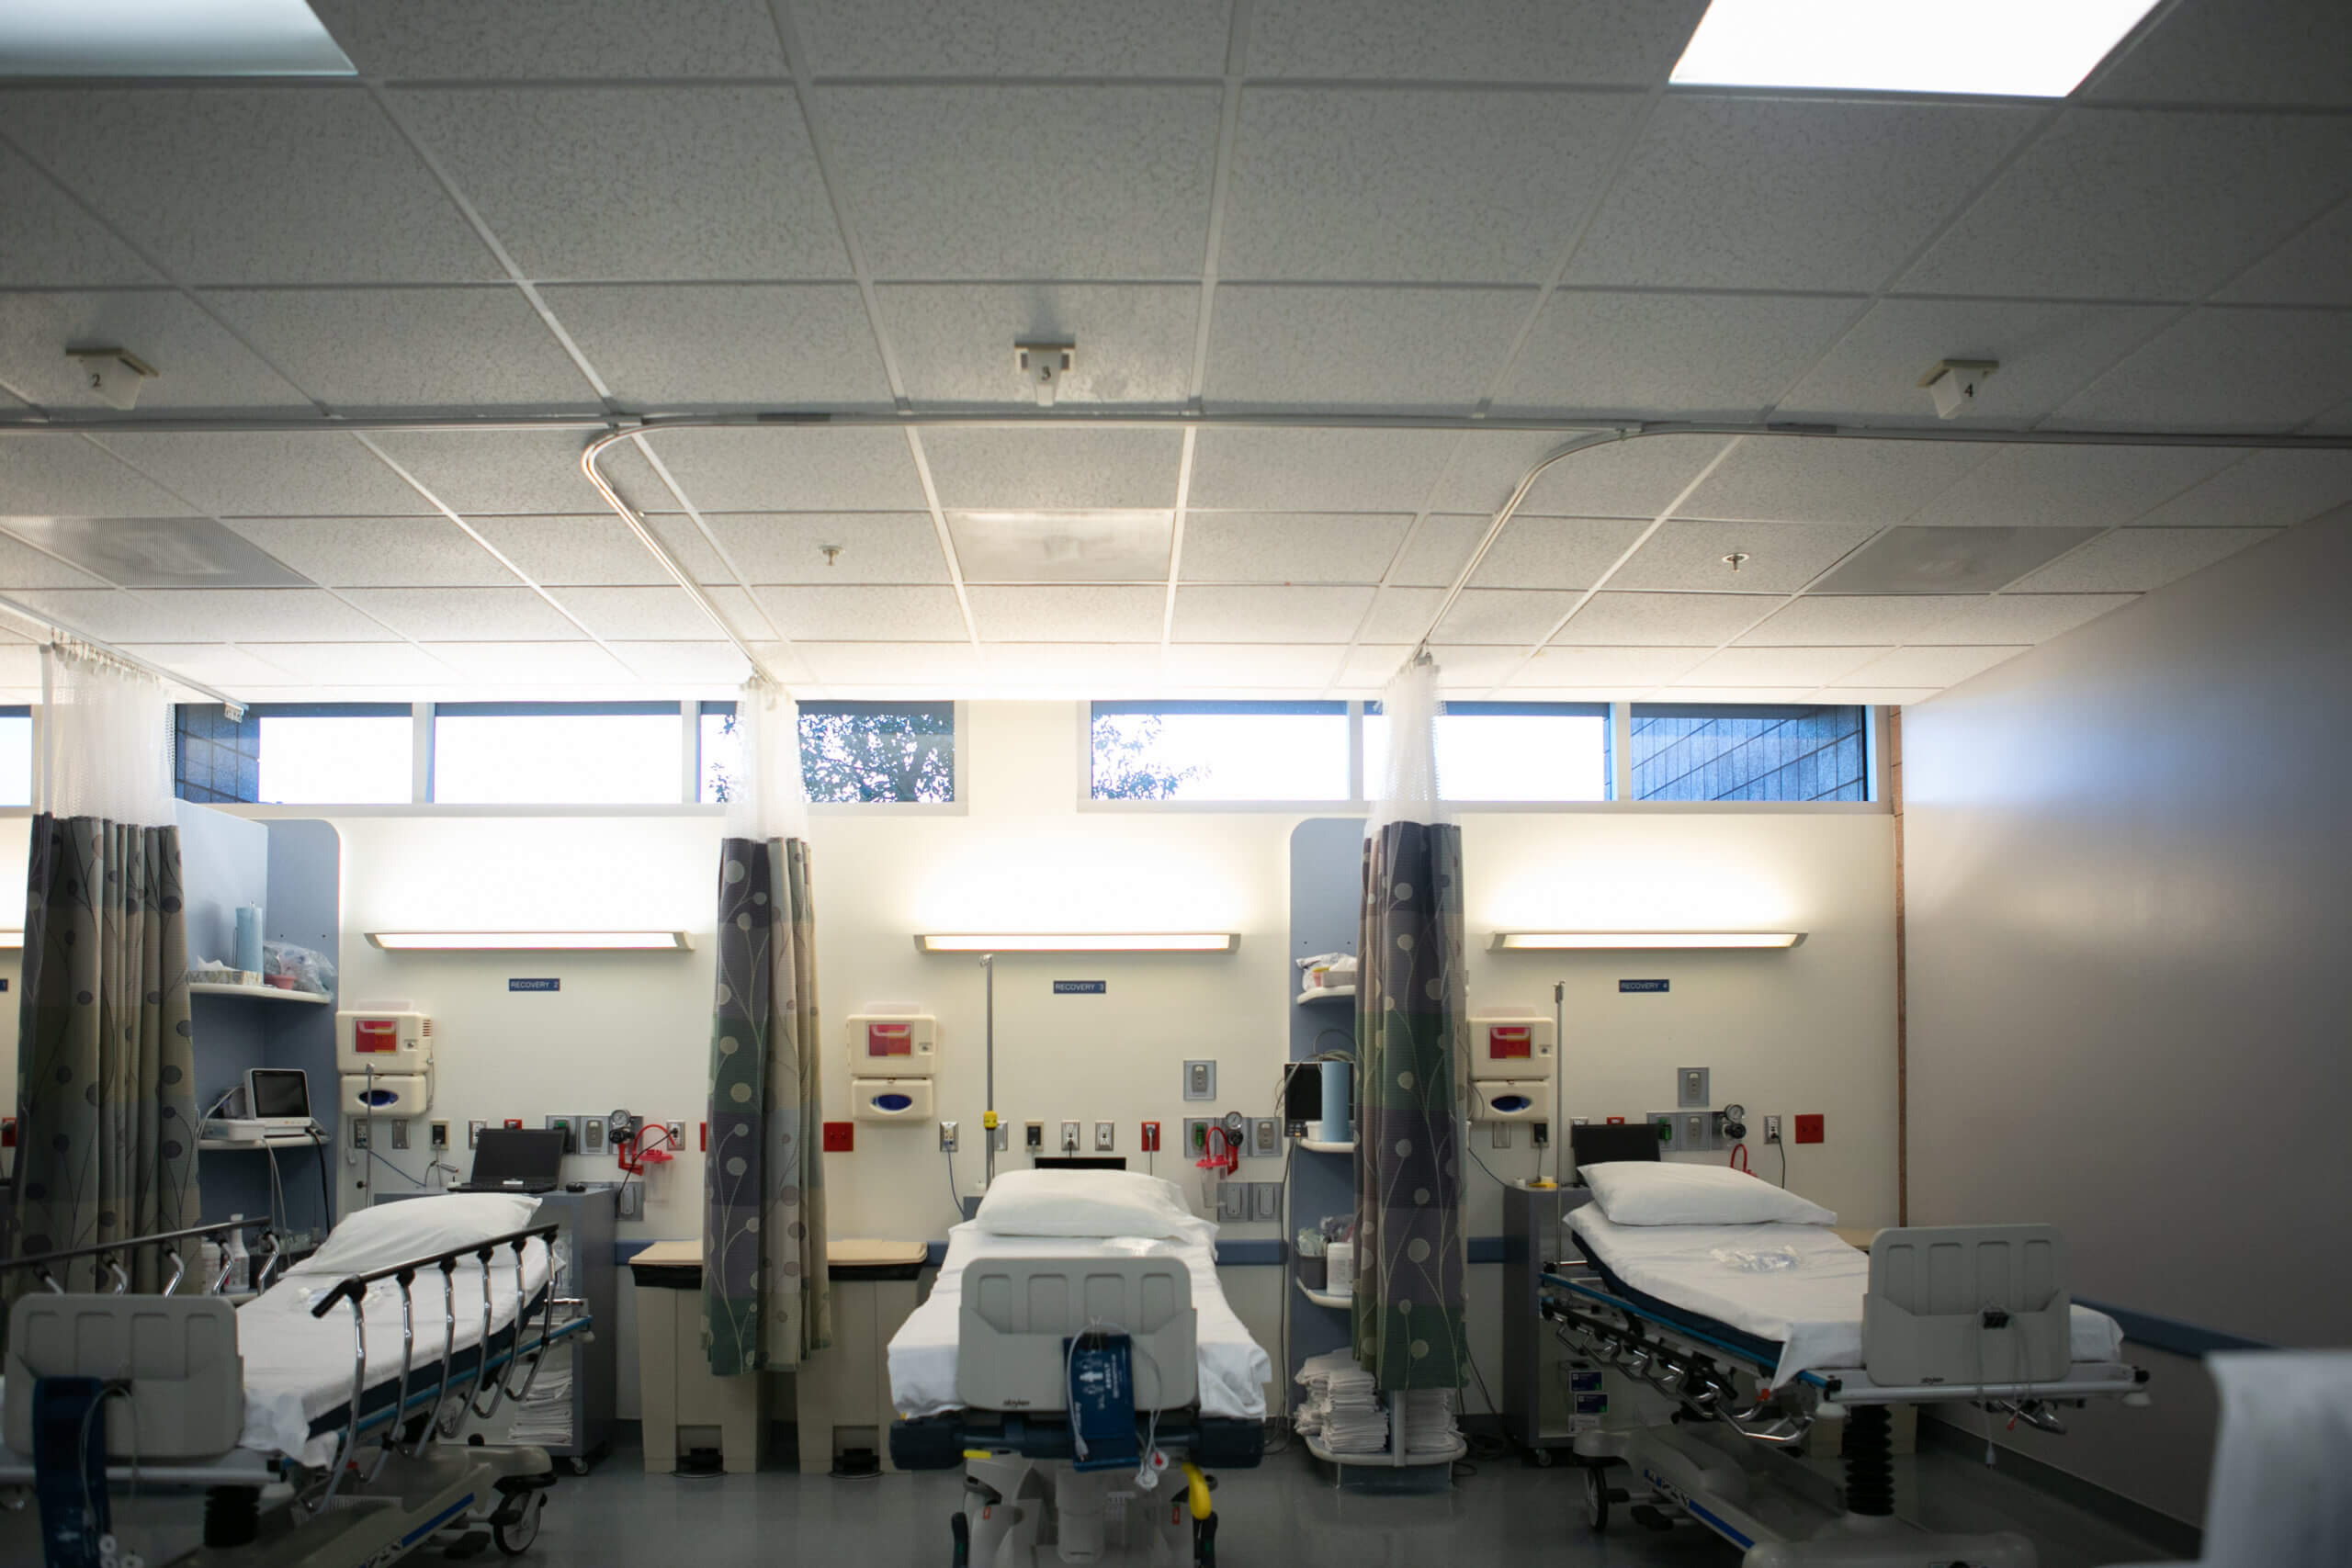 A row of three hospital beds where gastrointestinal doctors examine patients